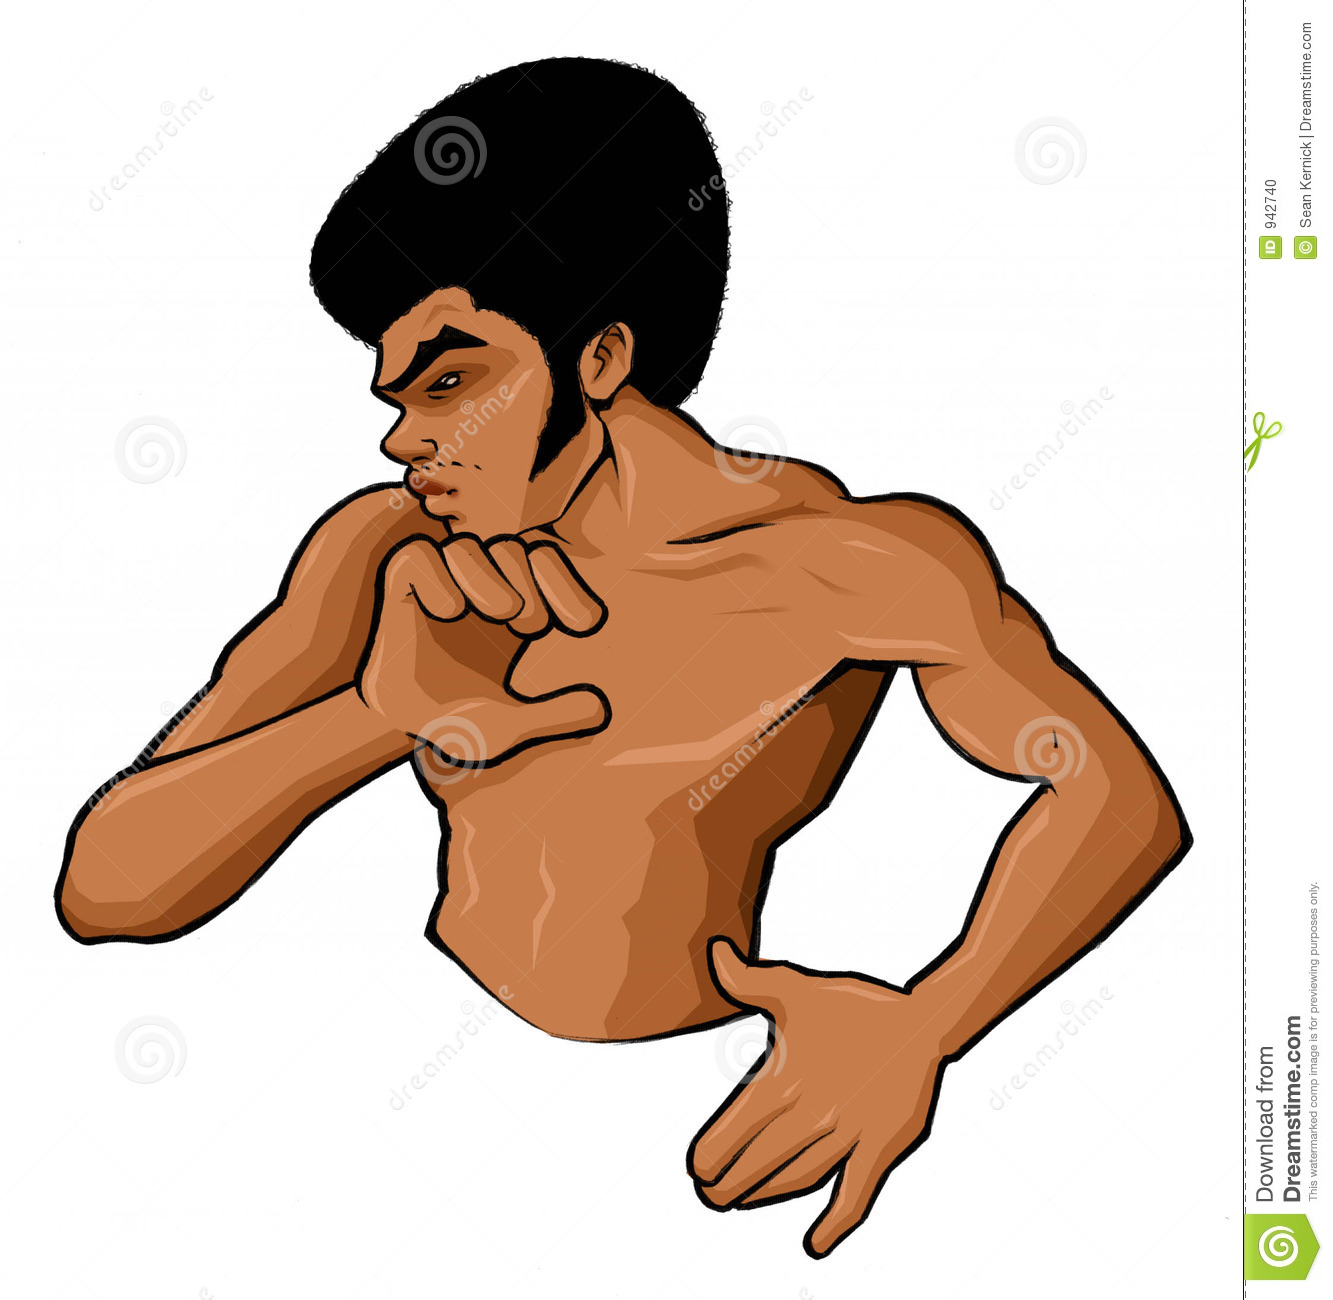 Hip Hop Sleek Style Man With Afro In Kung Fu Karate Pose